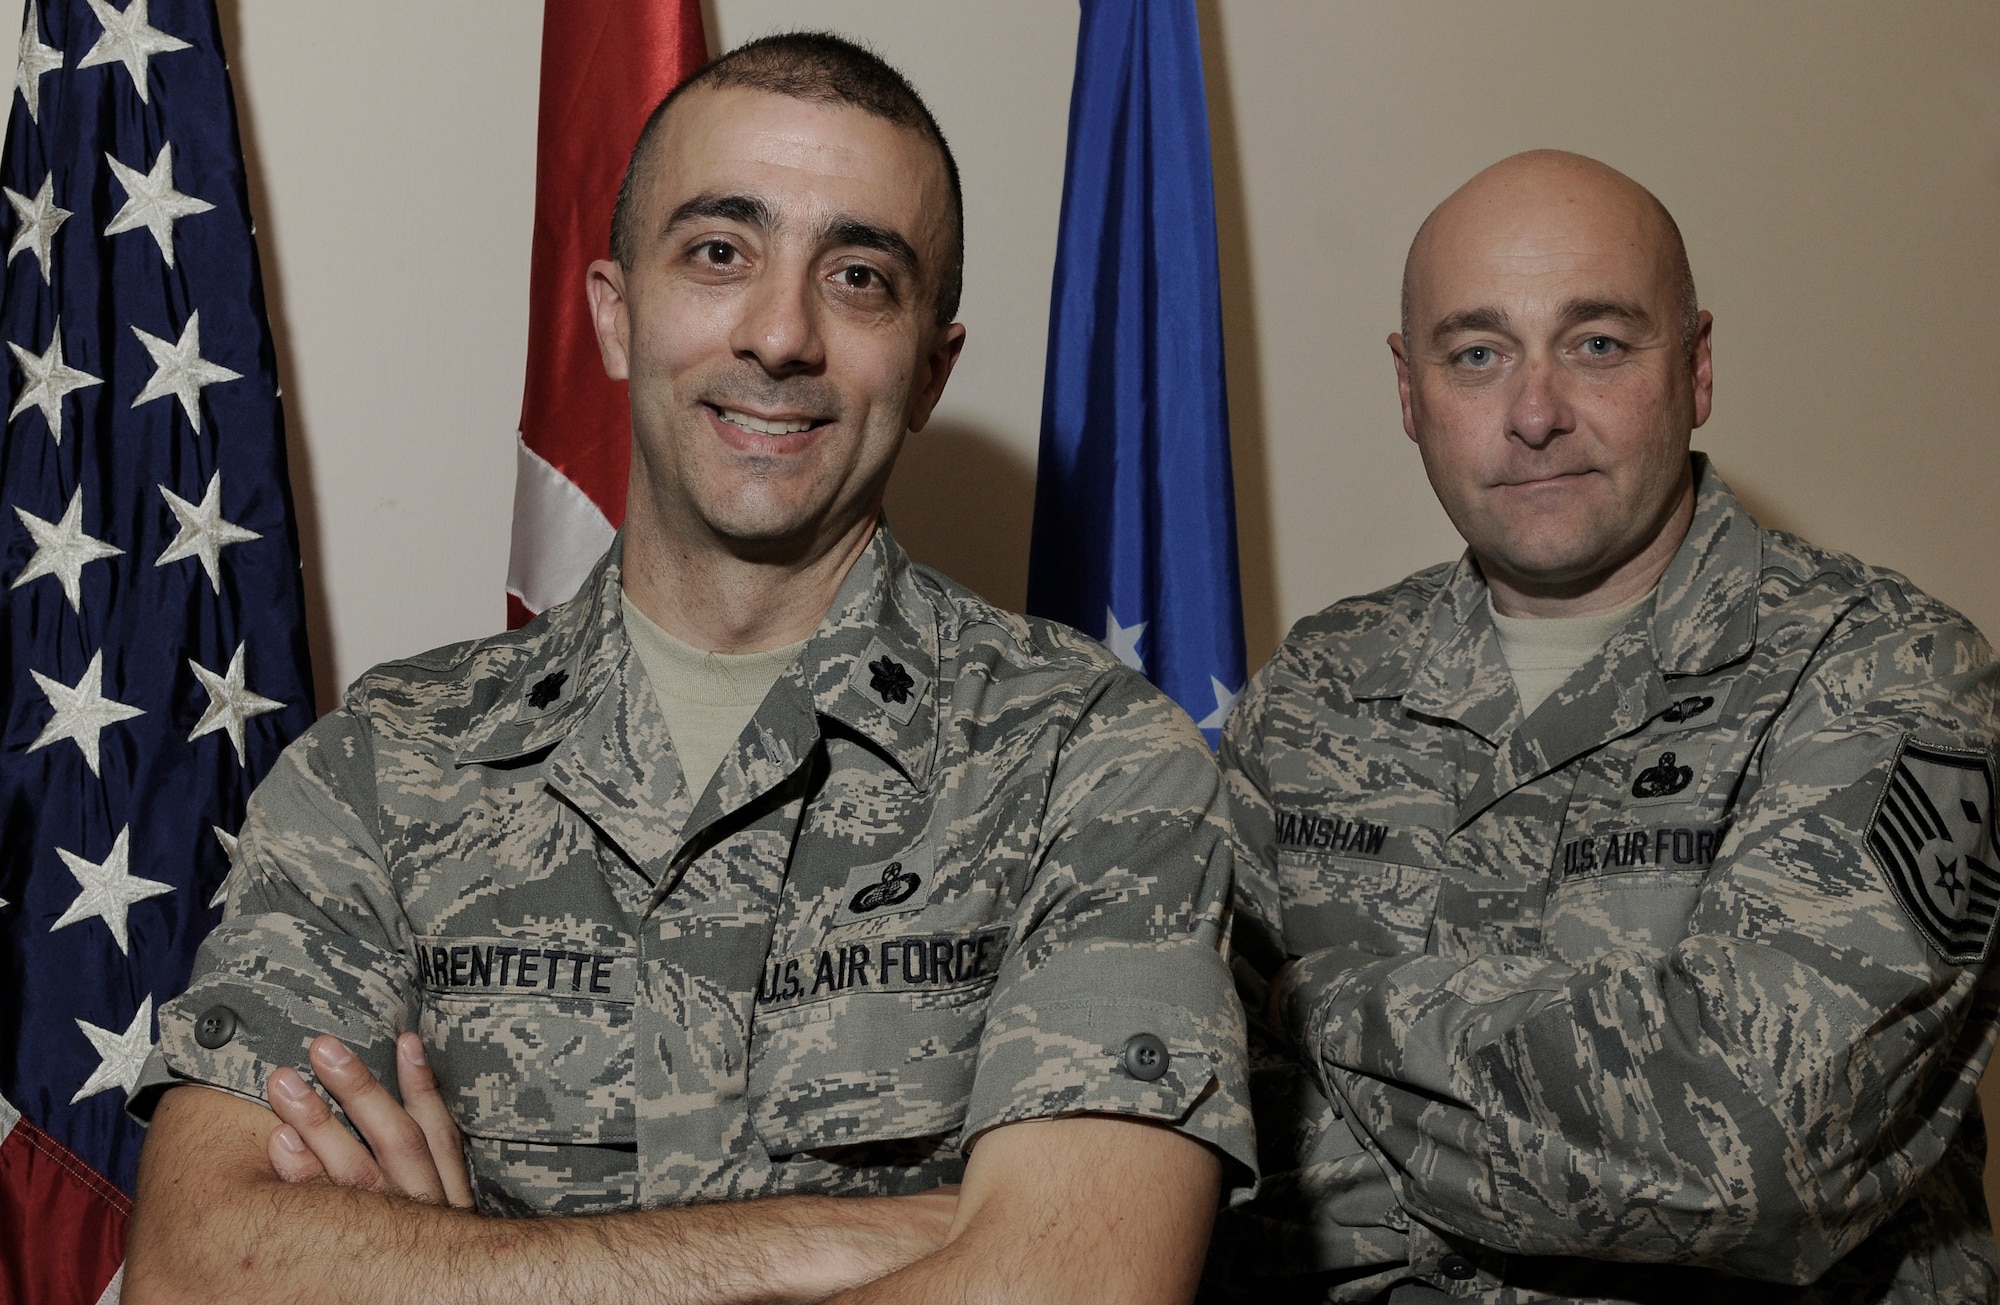 Lt. Col. Kenneth Marentette, 425th Air Base Squadron commander, stands with Master Sgt. Anthony Hanshaw, 425th  ABS First Sergeant Thursday June 10, 2010 at Izmir, Turkey. Colonel Marentette and Sergeant Hanshaw are in charge of nearly 100  Airmen stationed at the unit. Airmen in Izmir are geographically separated but still continuously provide support to each other and the overall mission. The 425th ABS provides world class mission support to U.S. personnel at NATO command Air Izmir, the Office of Defense Cooperation, and the U.S. embassy, as well as administers the Çigli Air Base turnover agreement. (U.S. Air Force photo/Senior Airman Alexandre Montes)